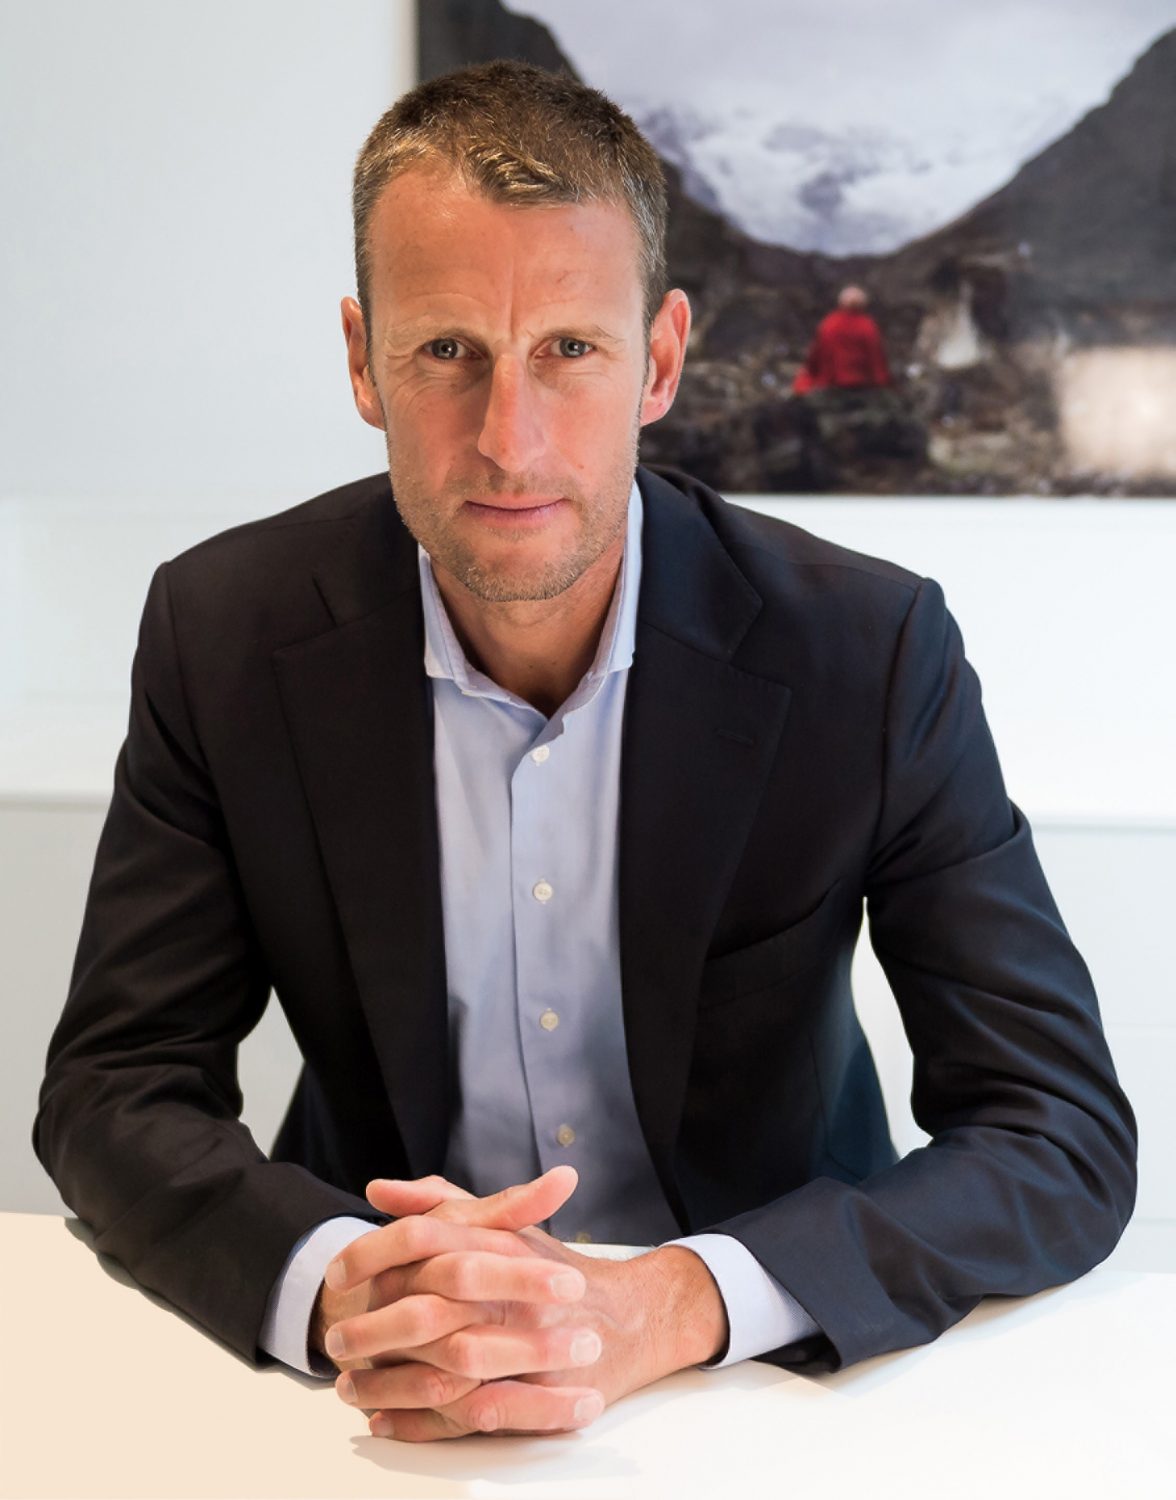 Patrick Pruniaux appointed CEO of Ulysse Nardin